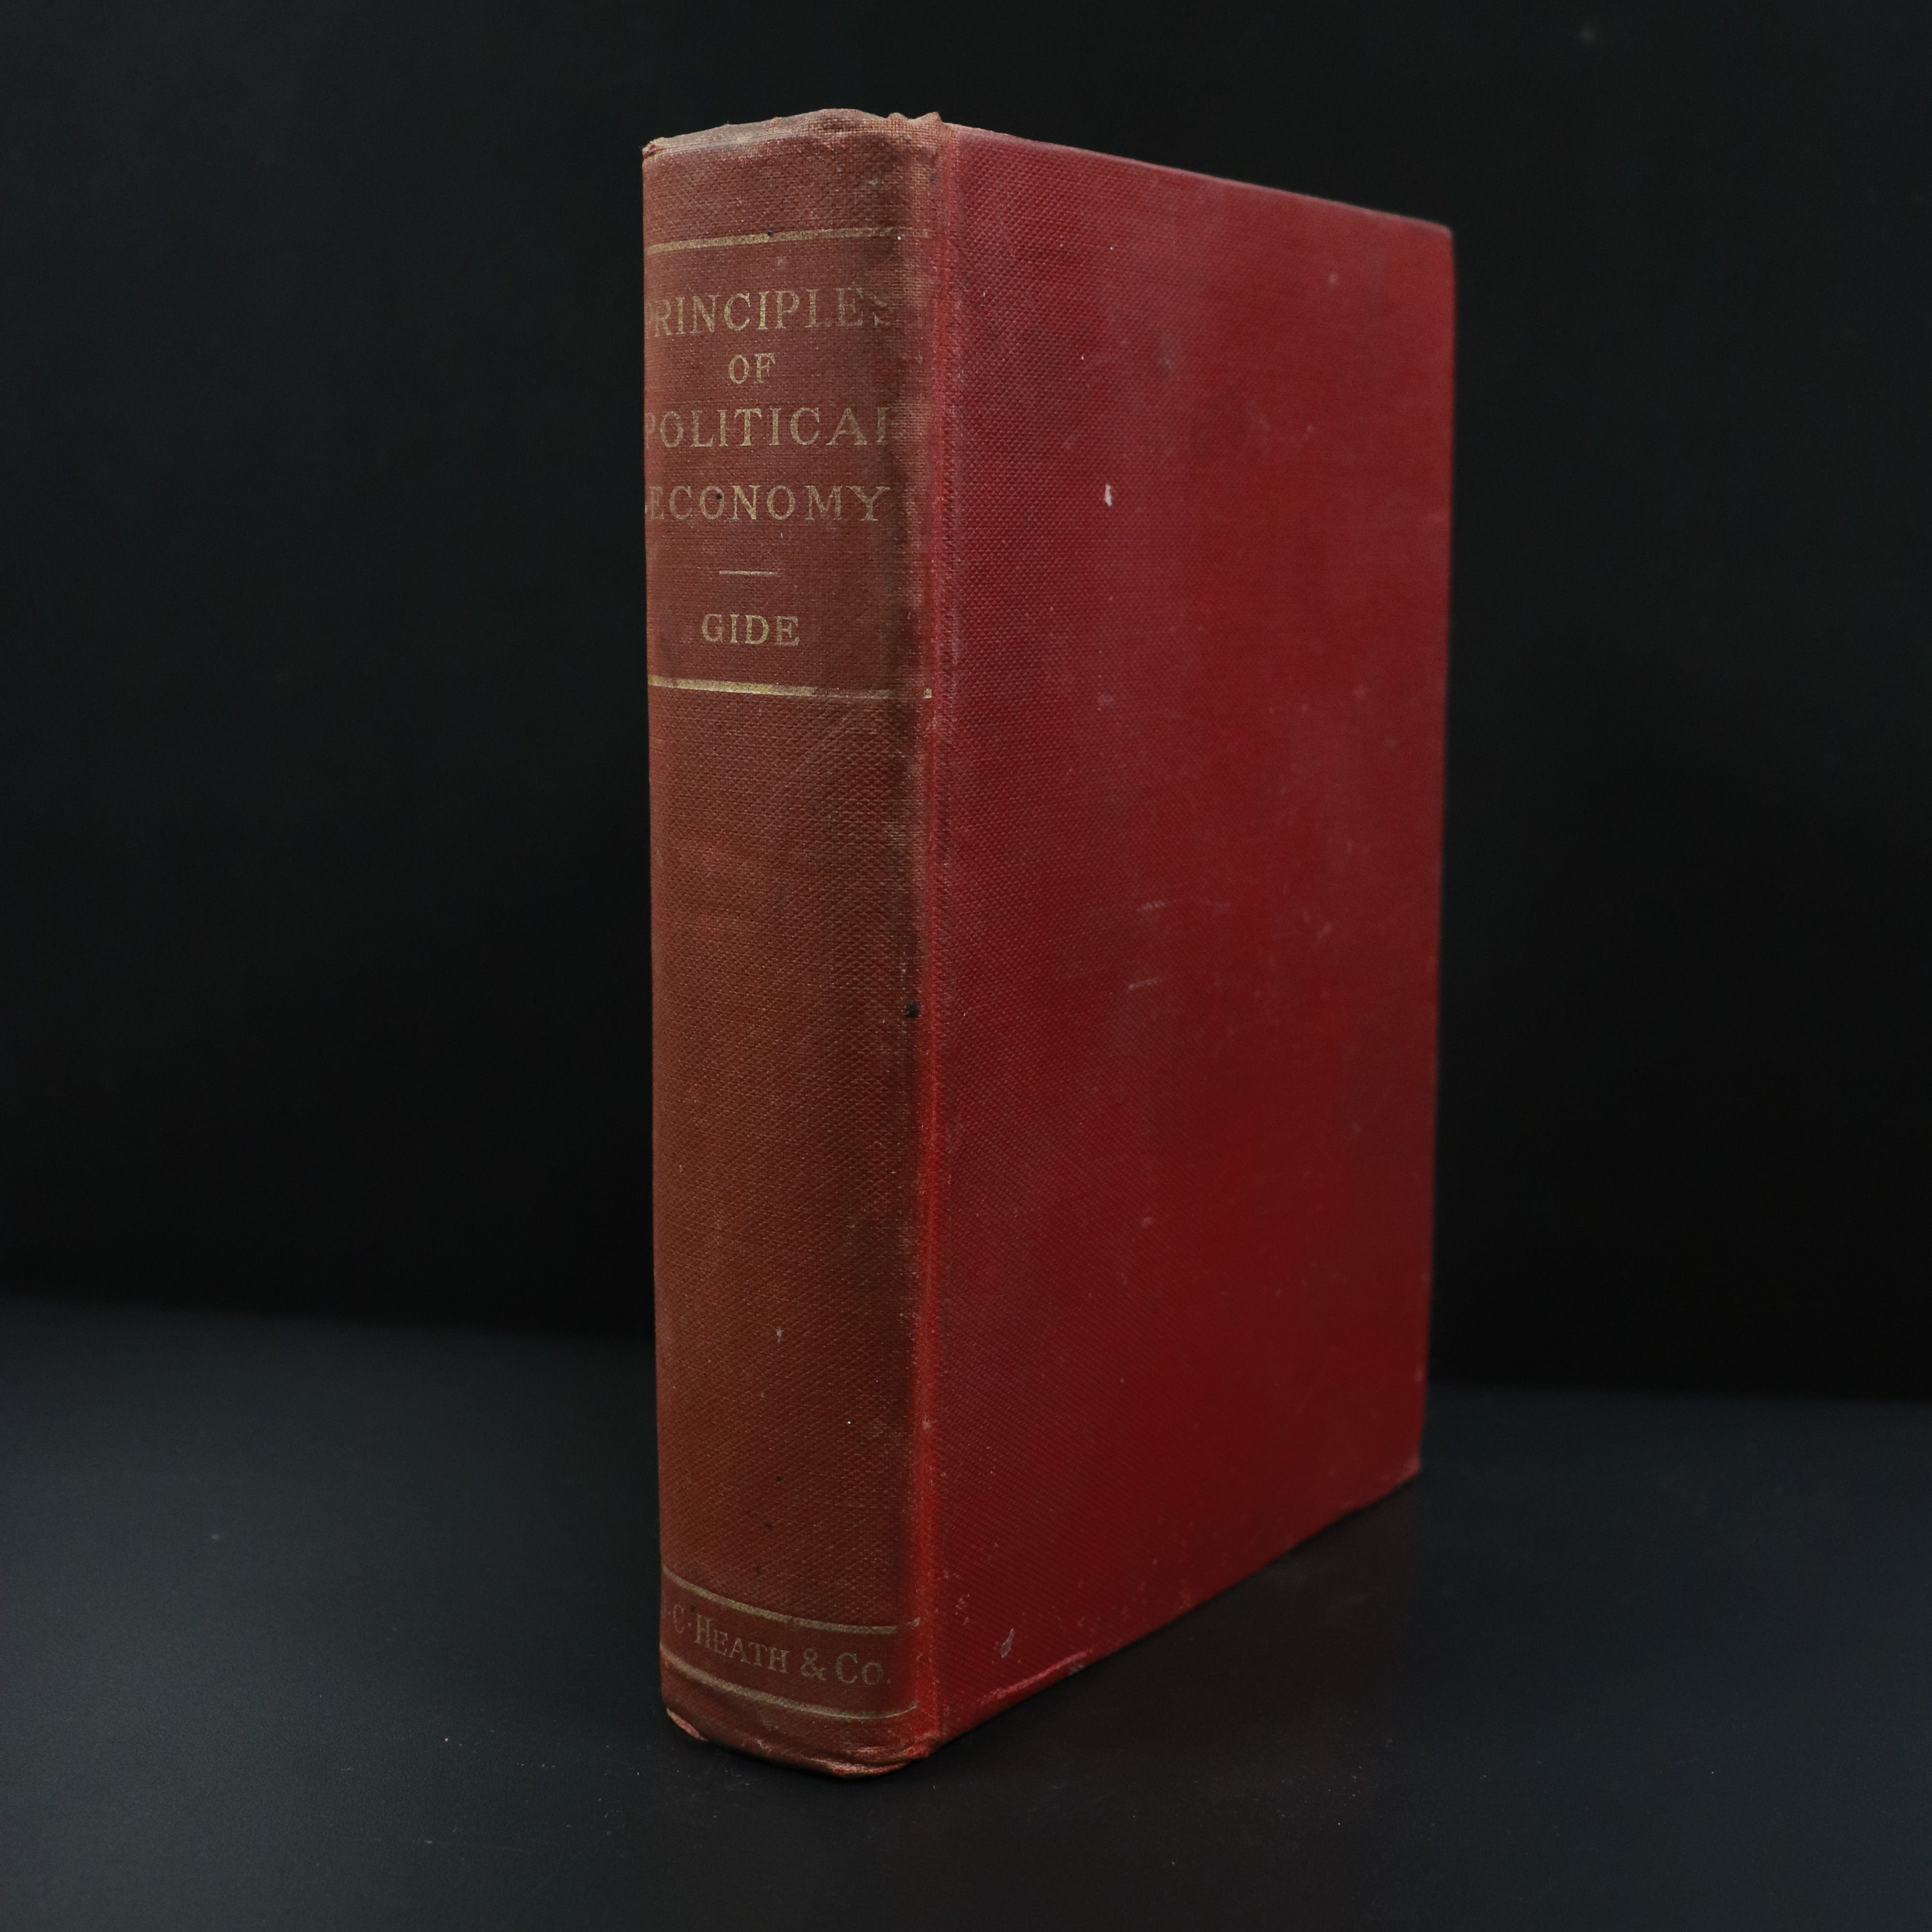 1903 Principles Of Political Economy by Charles Gide Antique Economics Book